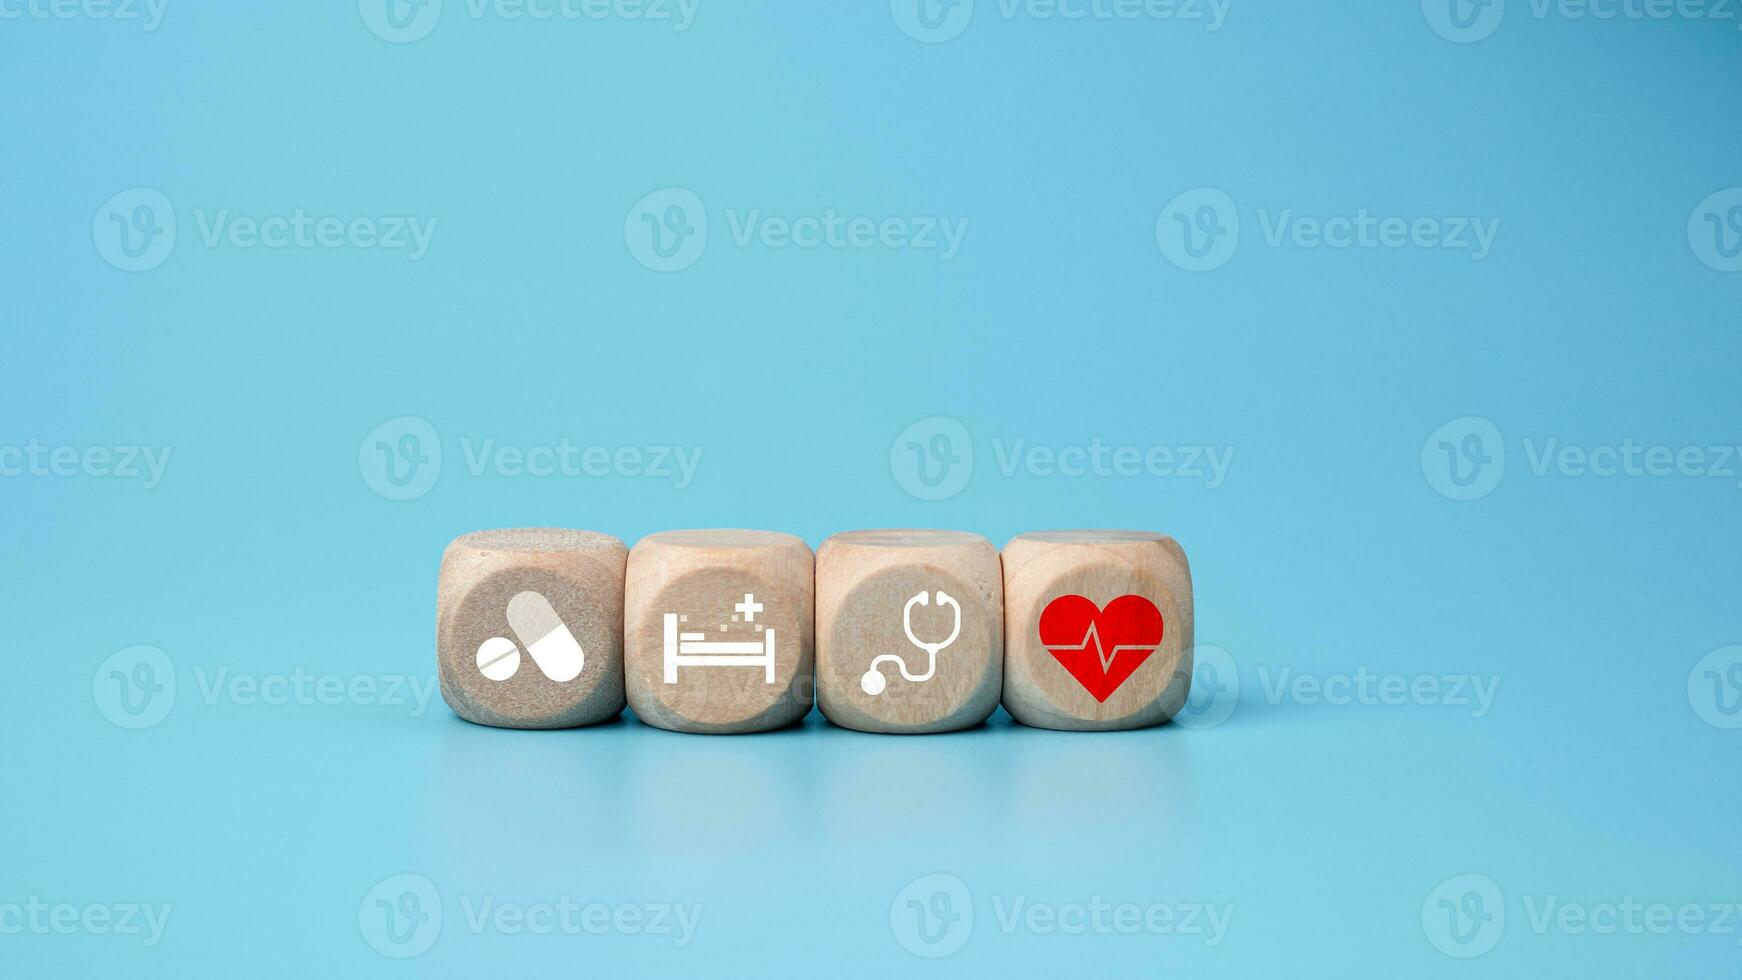 Wooden blocks with medical symbol icons on blue background representing health concept with treatment and medicine. photo